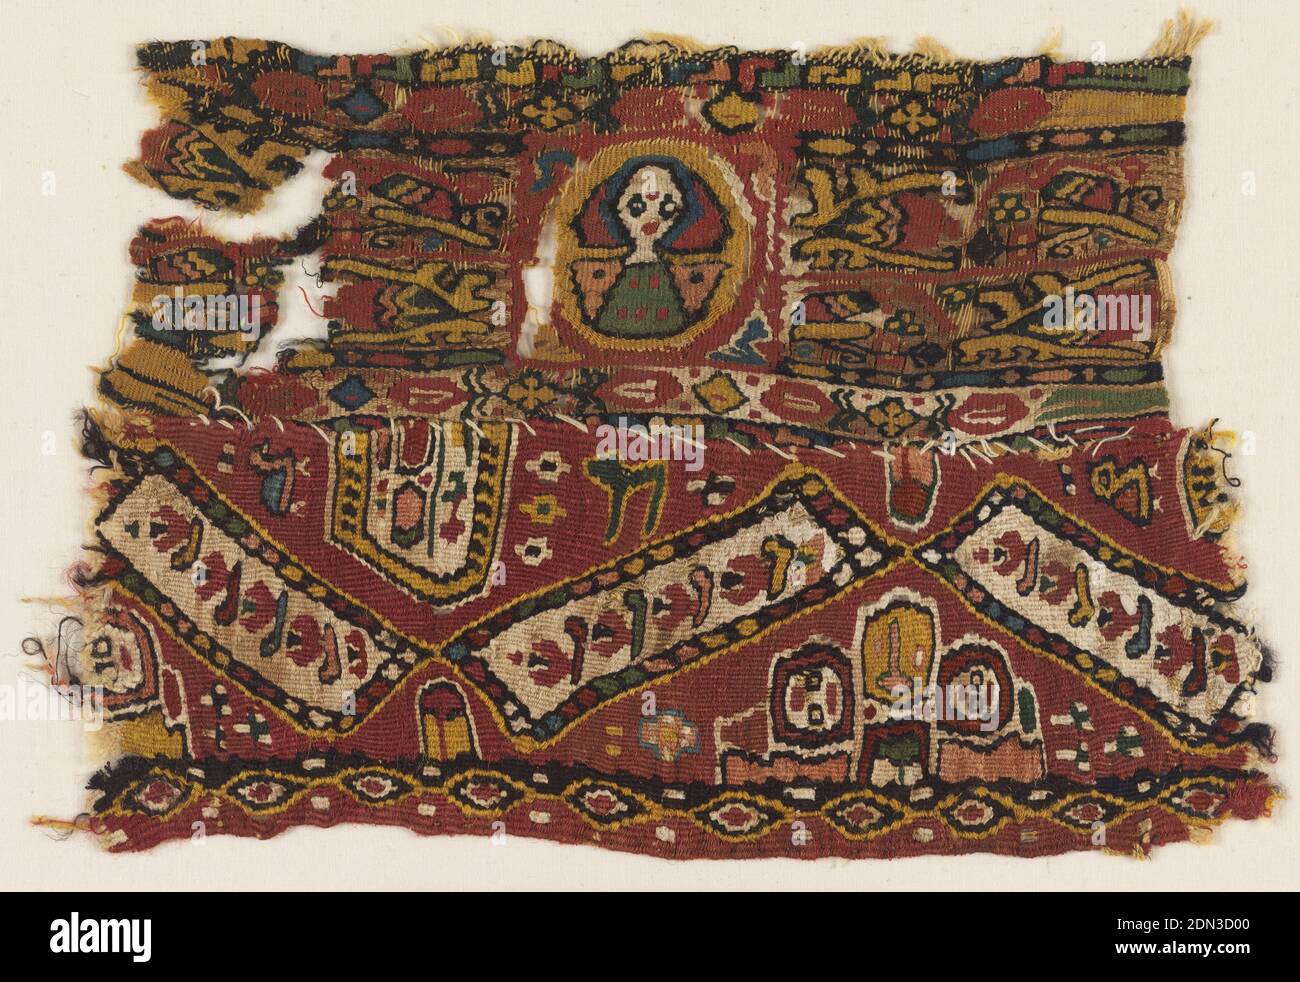 Textile, Medium: linen, wool Technique: tapestry weave, Two pieces sewn together. Tapestry weave linen and wool textile with design of a figure within a roundel surrounded by yellow patterns on a red ground. At bottom, three interconnected rectangles aurrounded by birds, flowers and heads. Three bands of horizontal geometric ornament: at top, interlocking L-shapes; at center, flowers, lozenges and diamonds; at bottom, interconnected eye forms with dots., Egypt, 700–1000, woven textiles, Textile Stock Photo